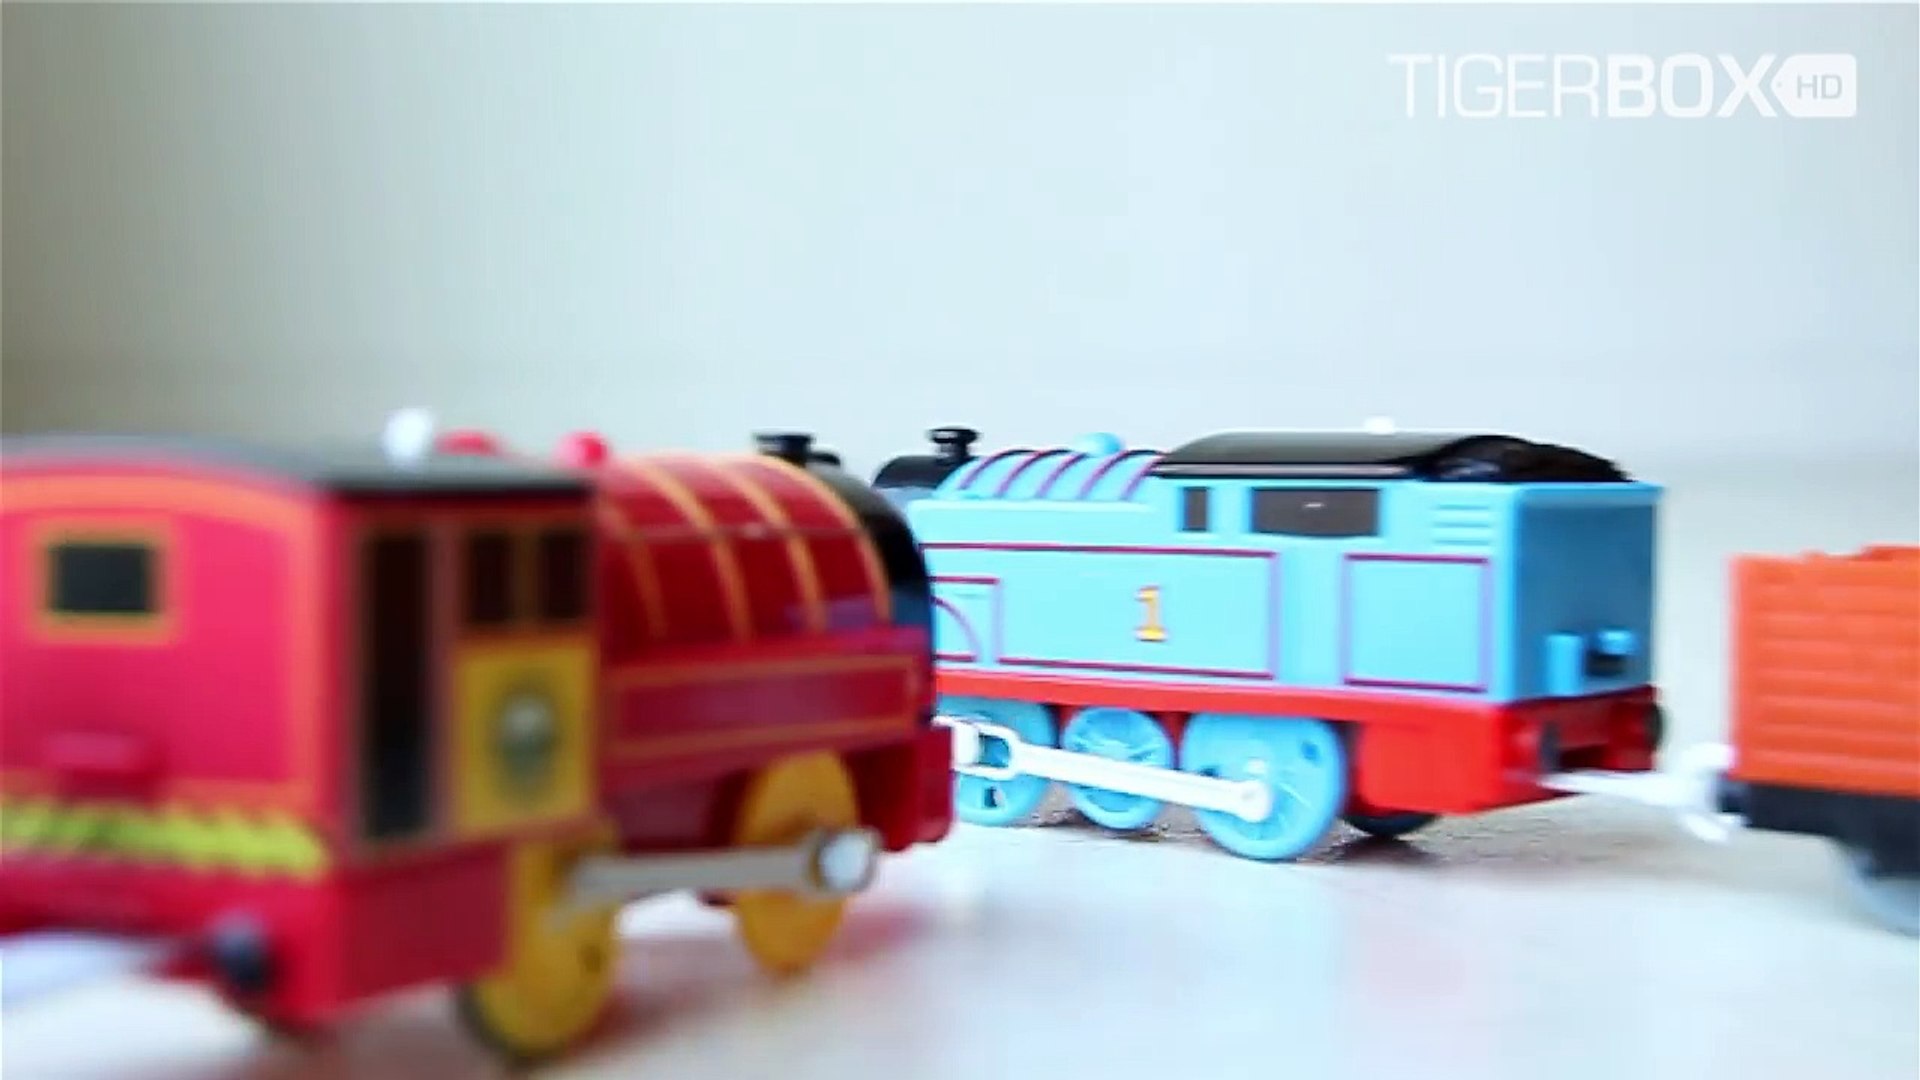 Thomas And Friends Accidents Will Happen Fast 2 Tigerbox Hd Video Dailymotion - tomy trackmaster thomas and friends roblox thomas and friends